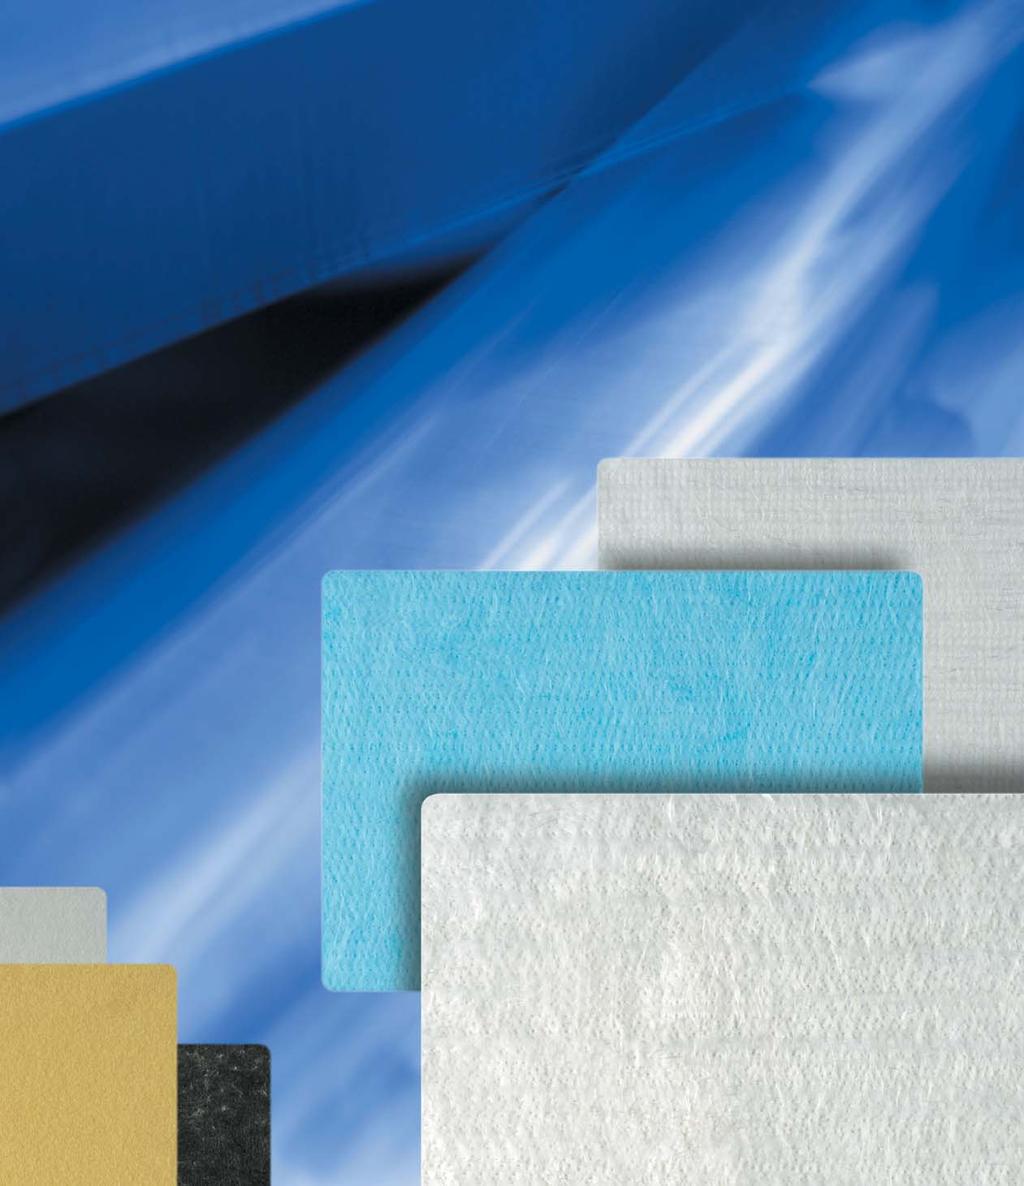 Technical needlemats for thermal and acoustic insulation and filtration